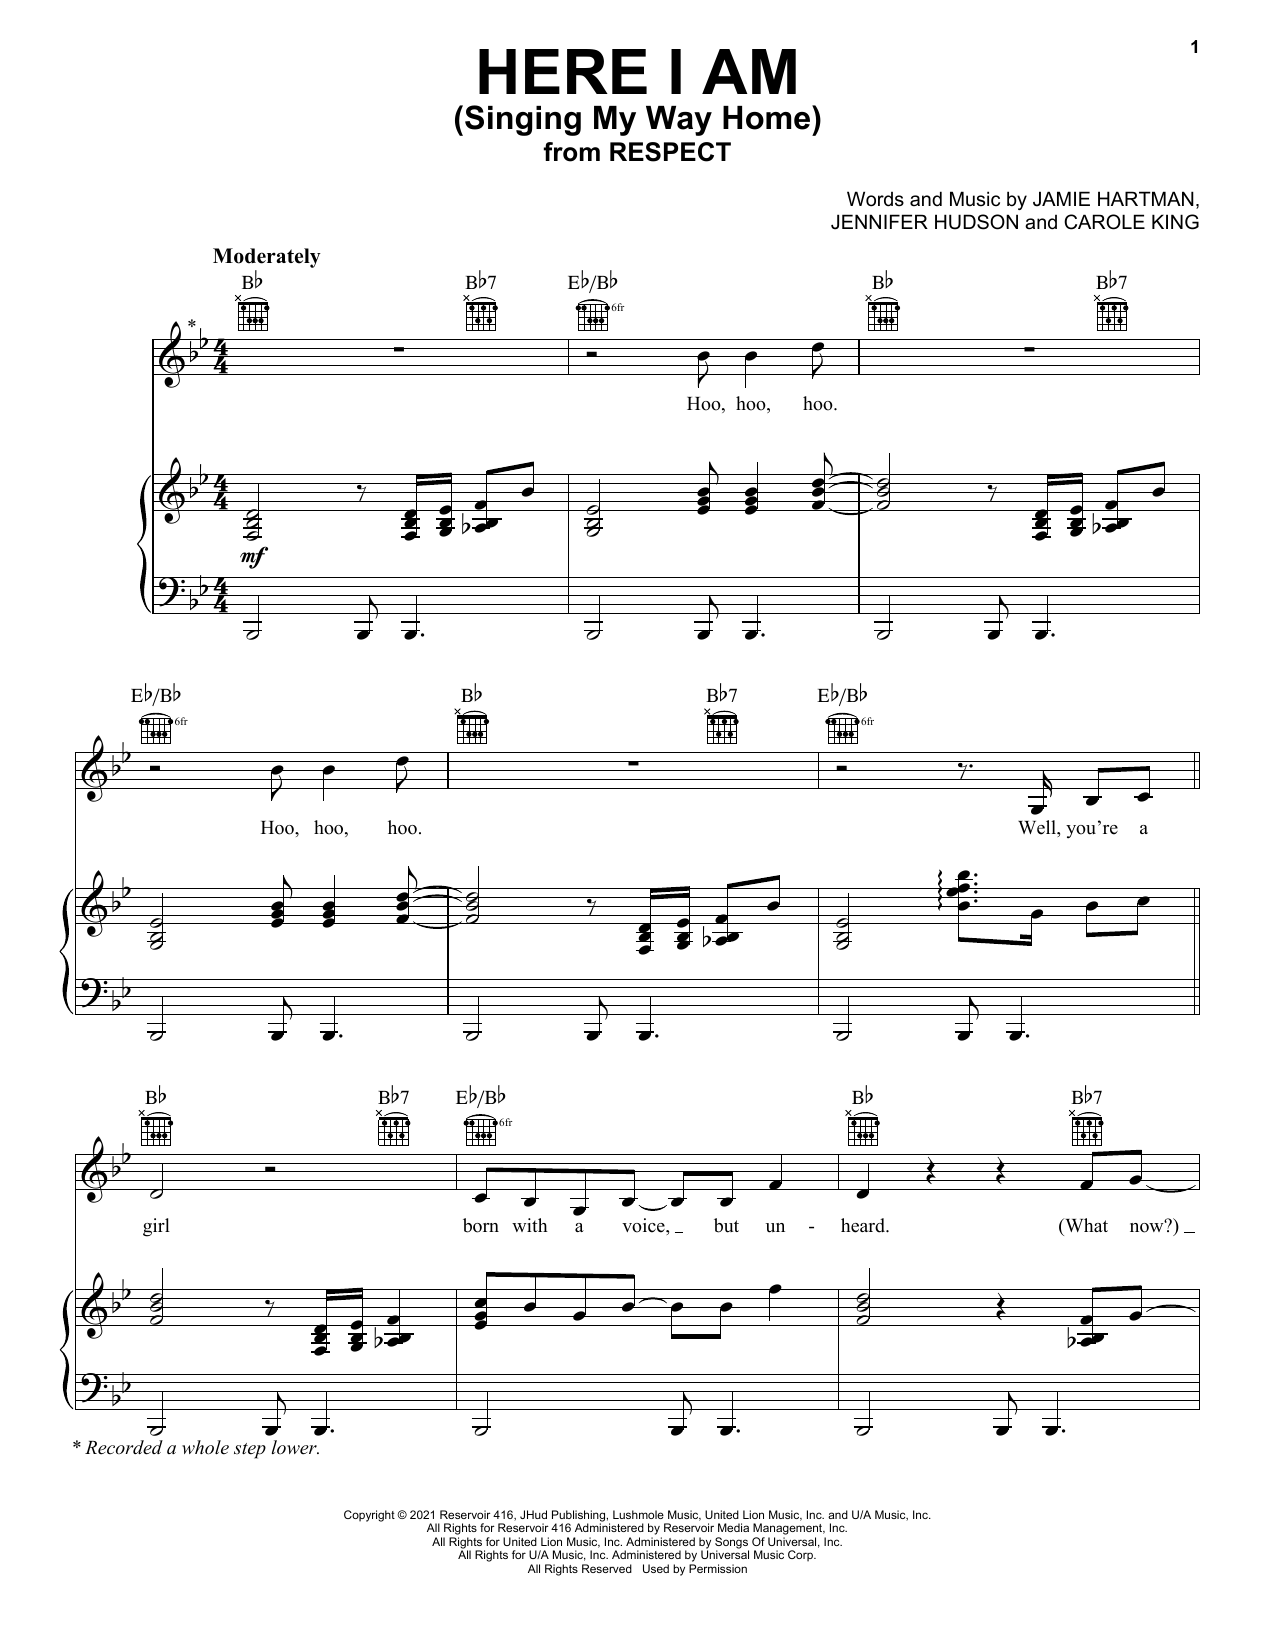 Jennifer Hudson Here I Am (Singing My Way Home) (from Respect) sheet music notes printable PDF score